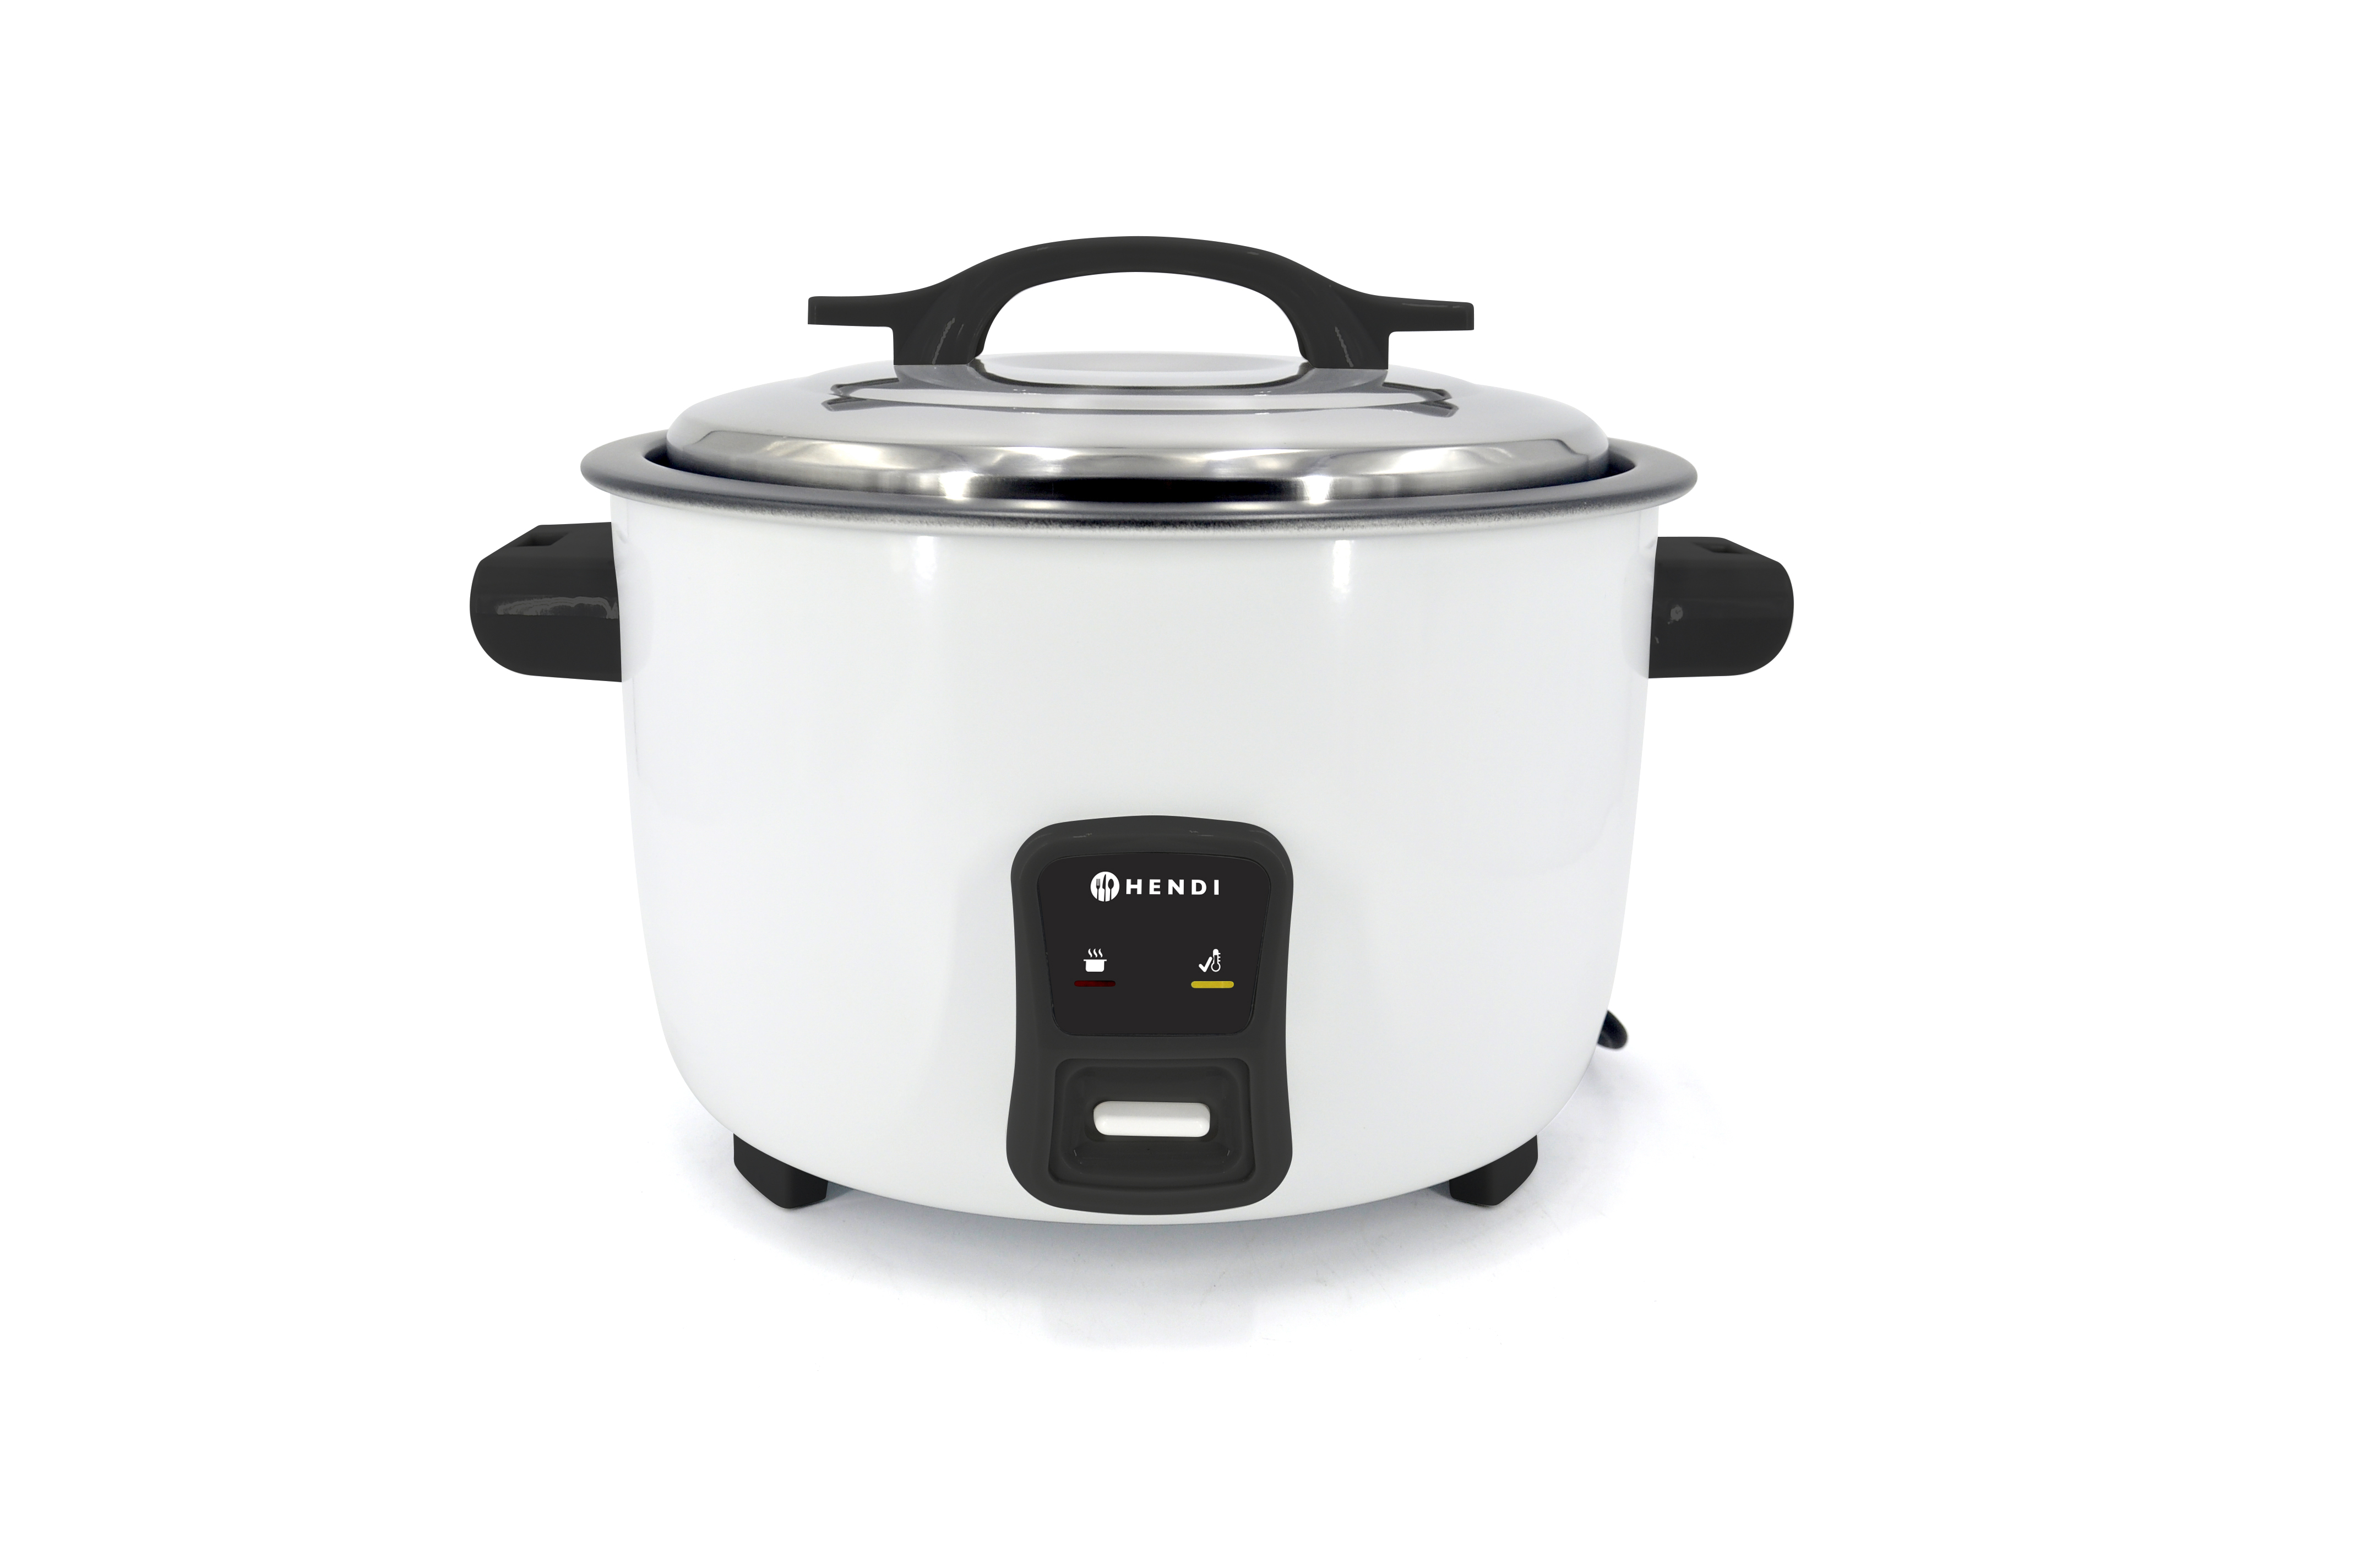 Small rice cooker with steamer non-stick coating removable rice